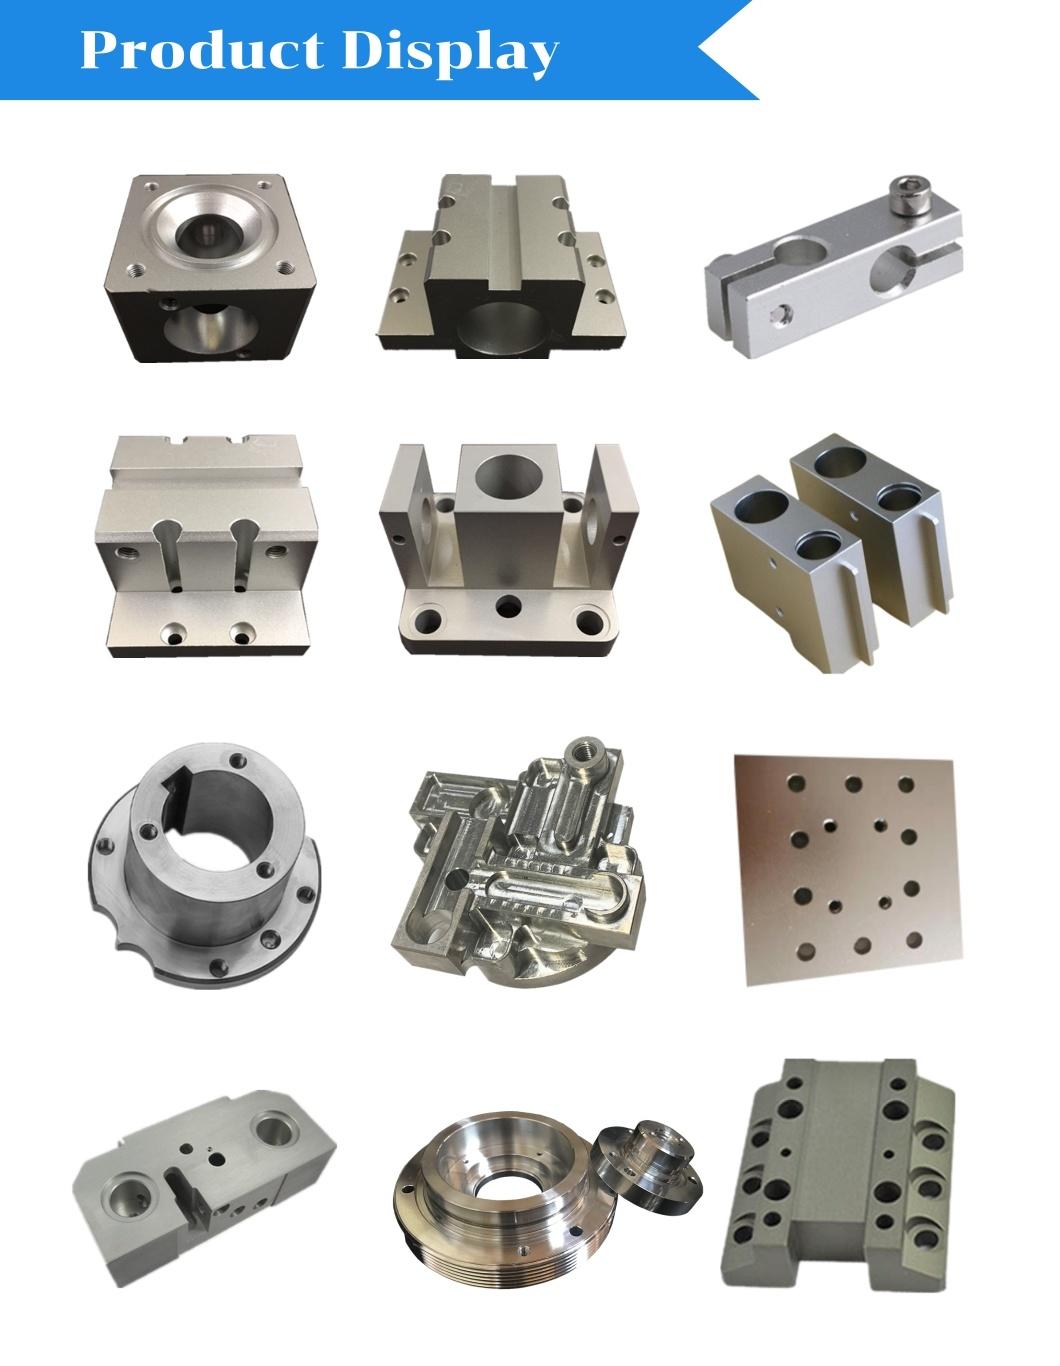 Chinese Manufacturer of Precision Forgings, Hot Forging Processing Parts